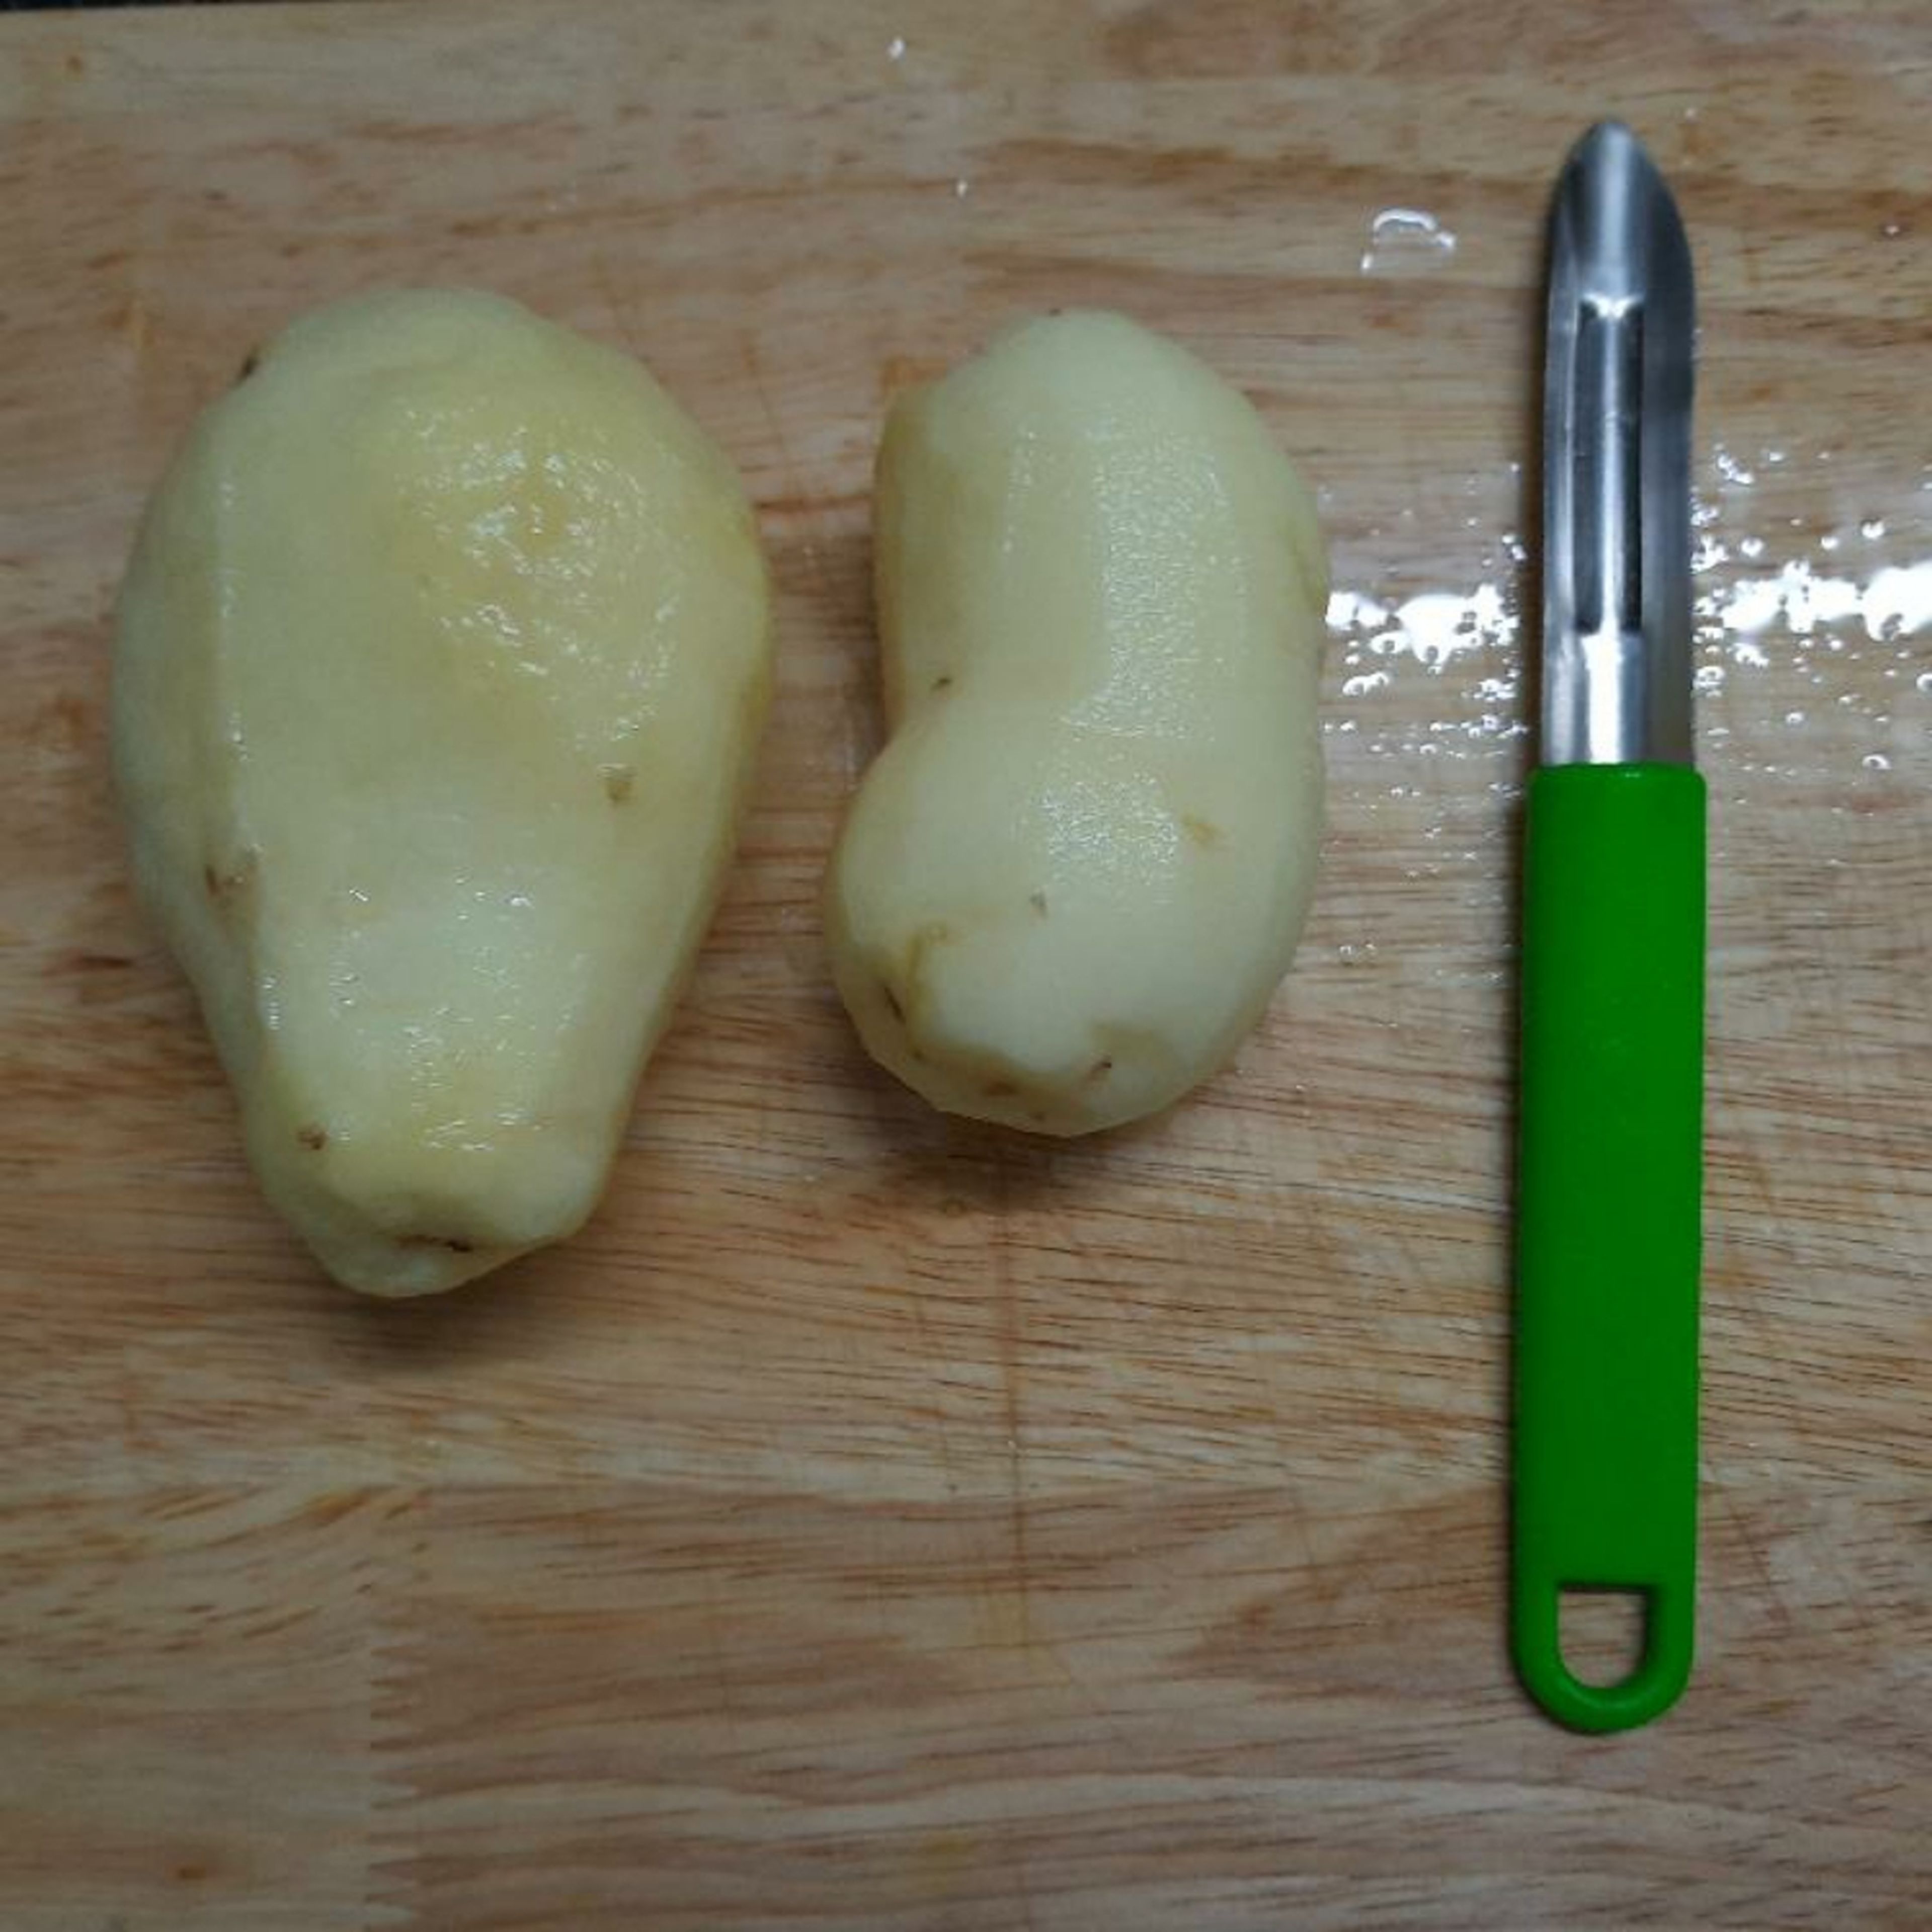 Peel the outer layer of potatoes and wash them again.